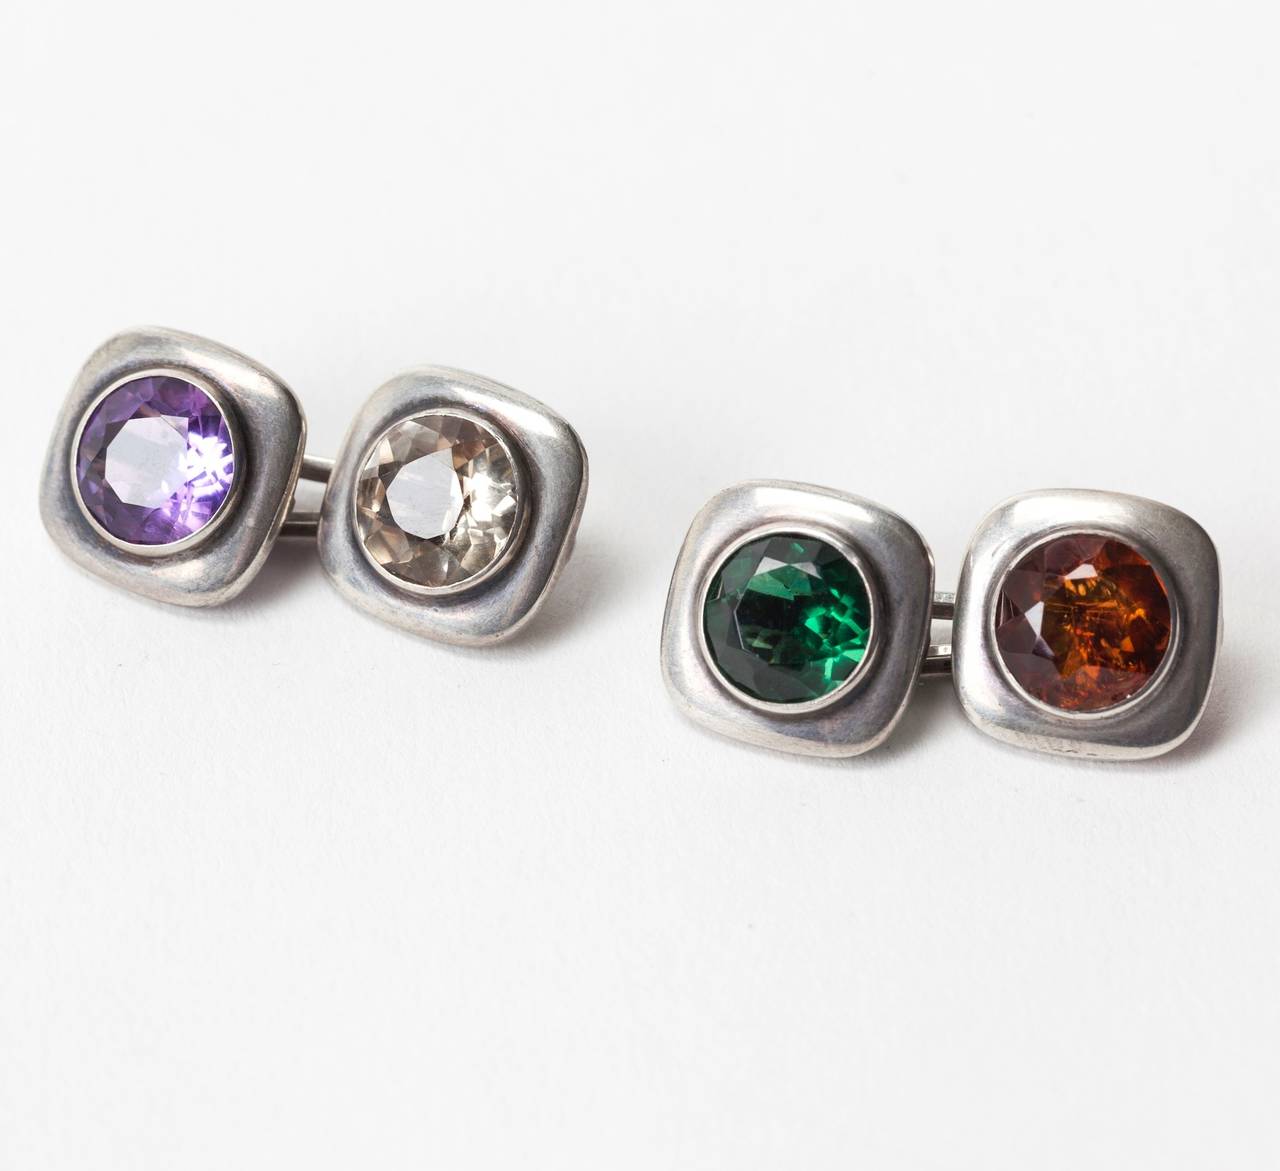 Elegant Art Deco Paste Cufflinks set in 835 silver with wonderfully colored stones, a combination of pastes and semiprecious stones. 1930's European. .5